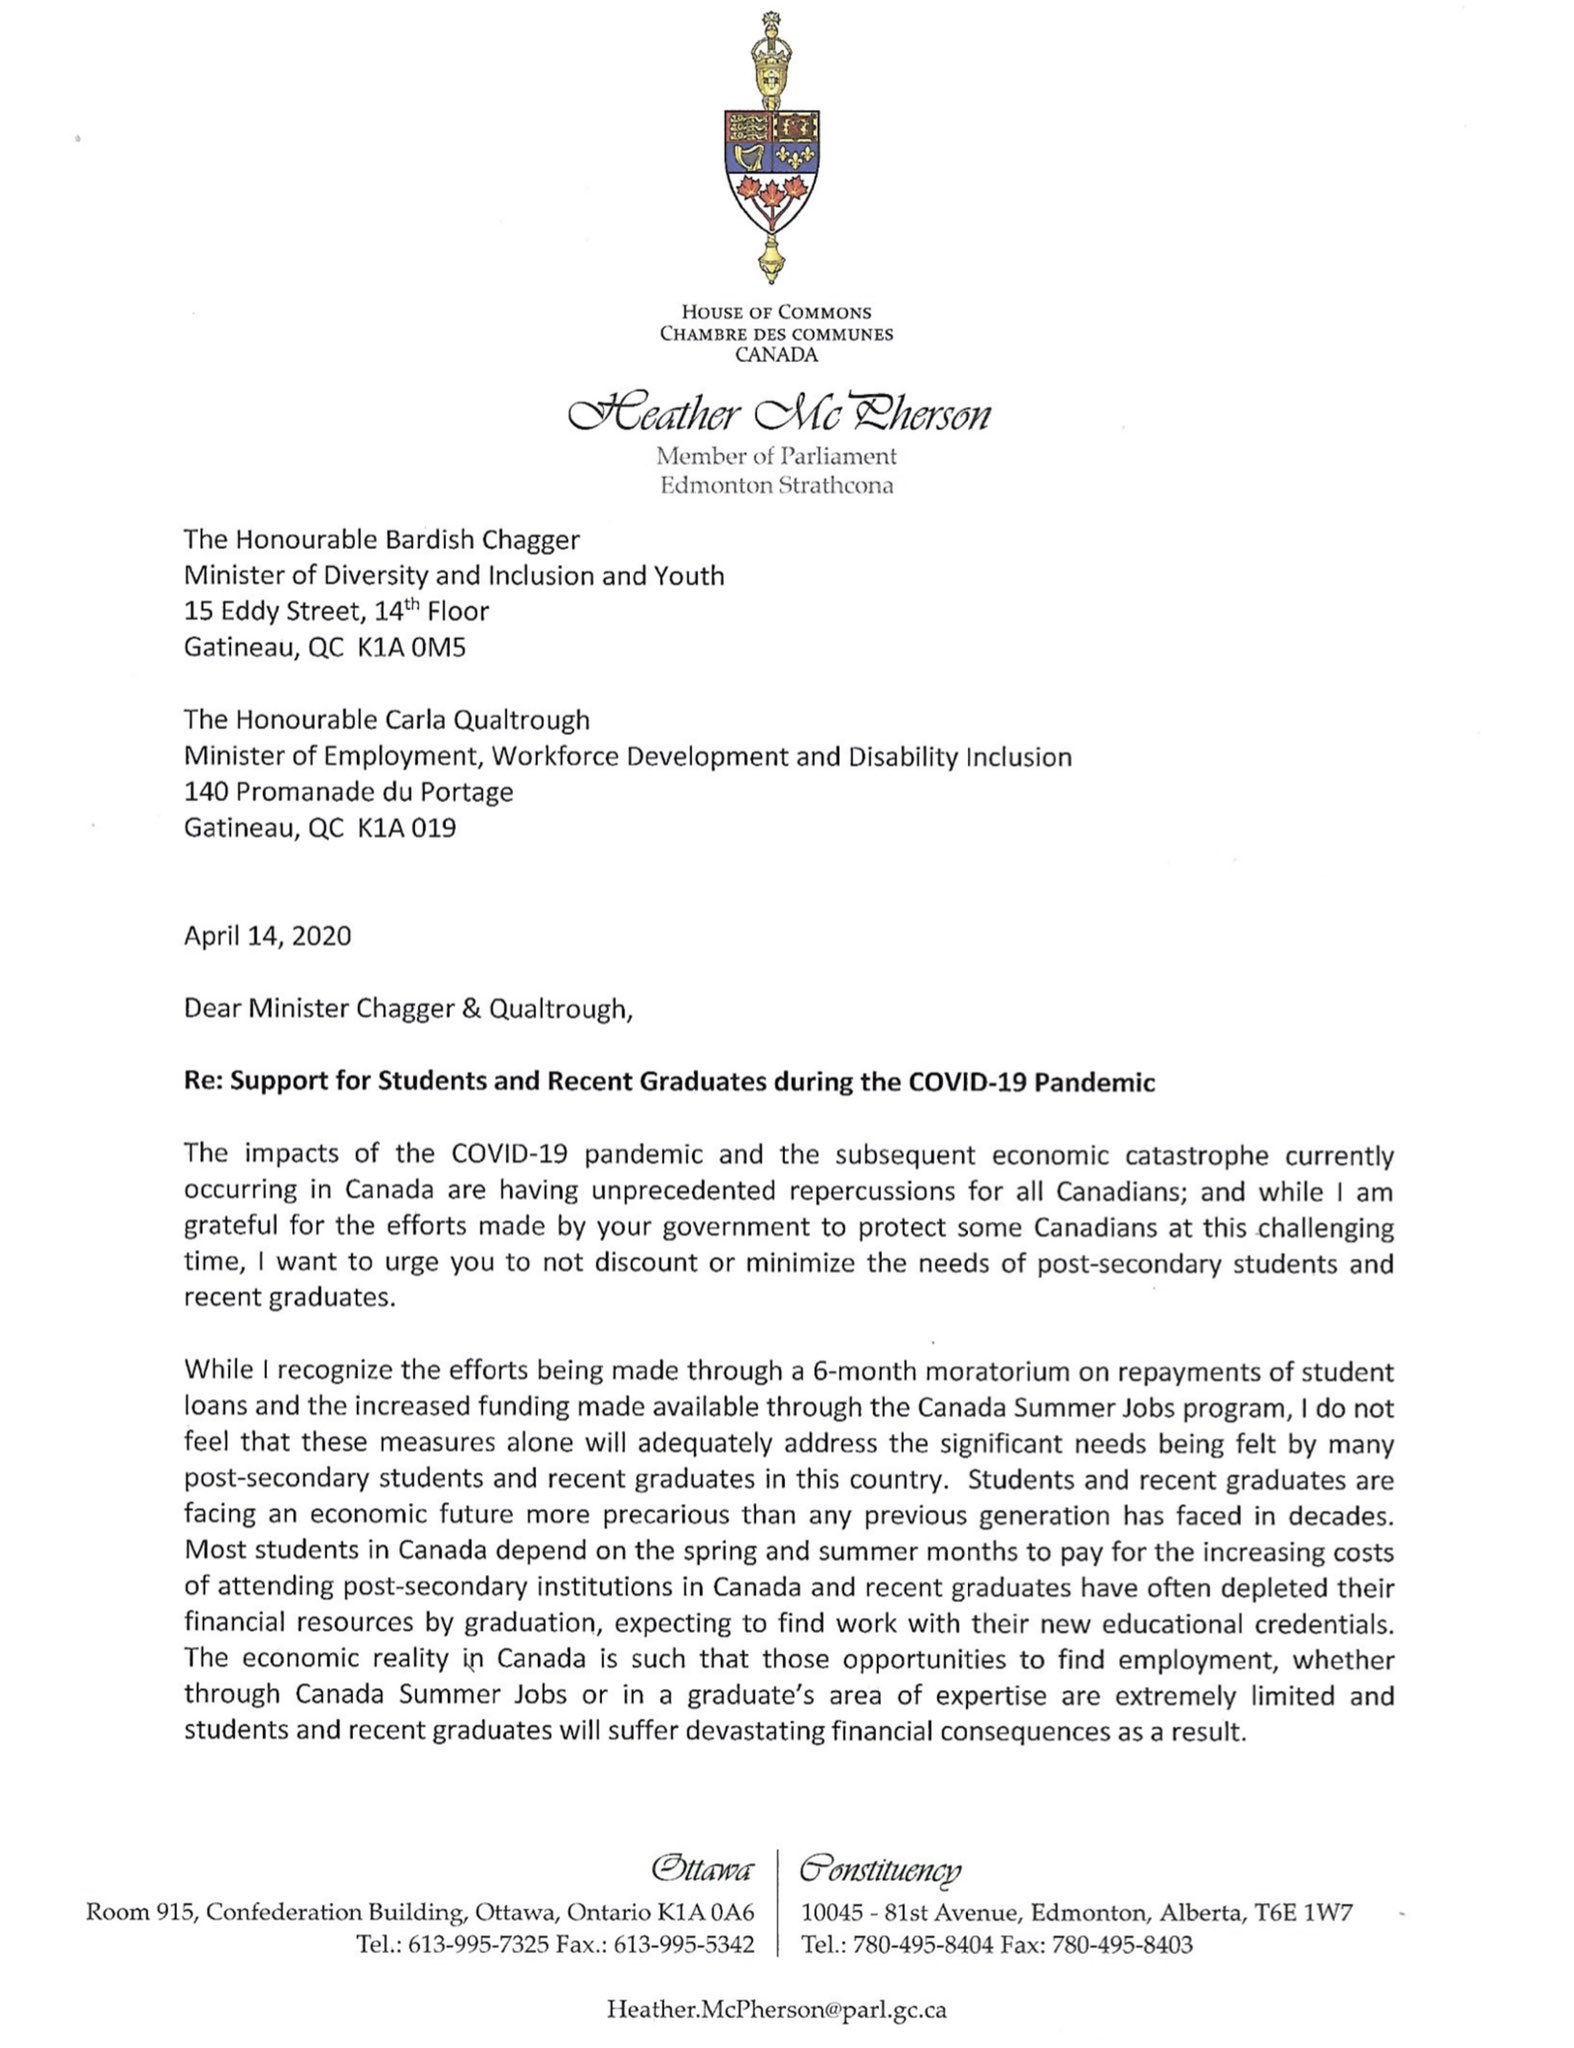 Letter to Ministers Chagger & Qualtrough Page 1